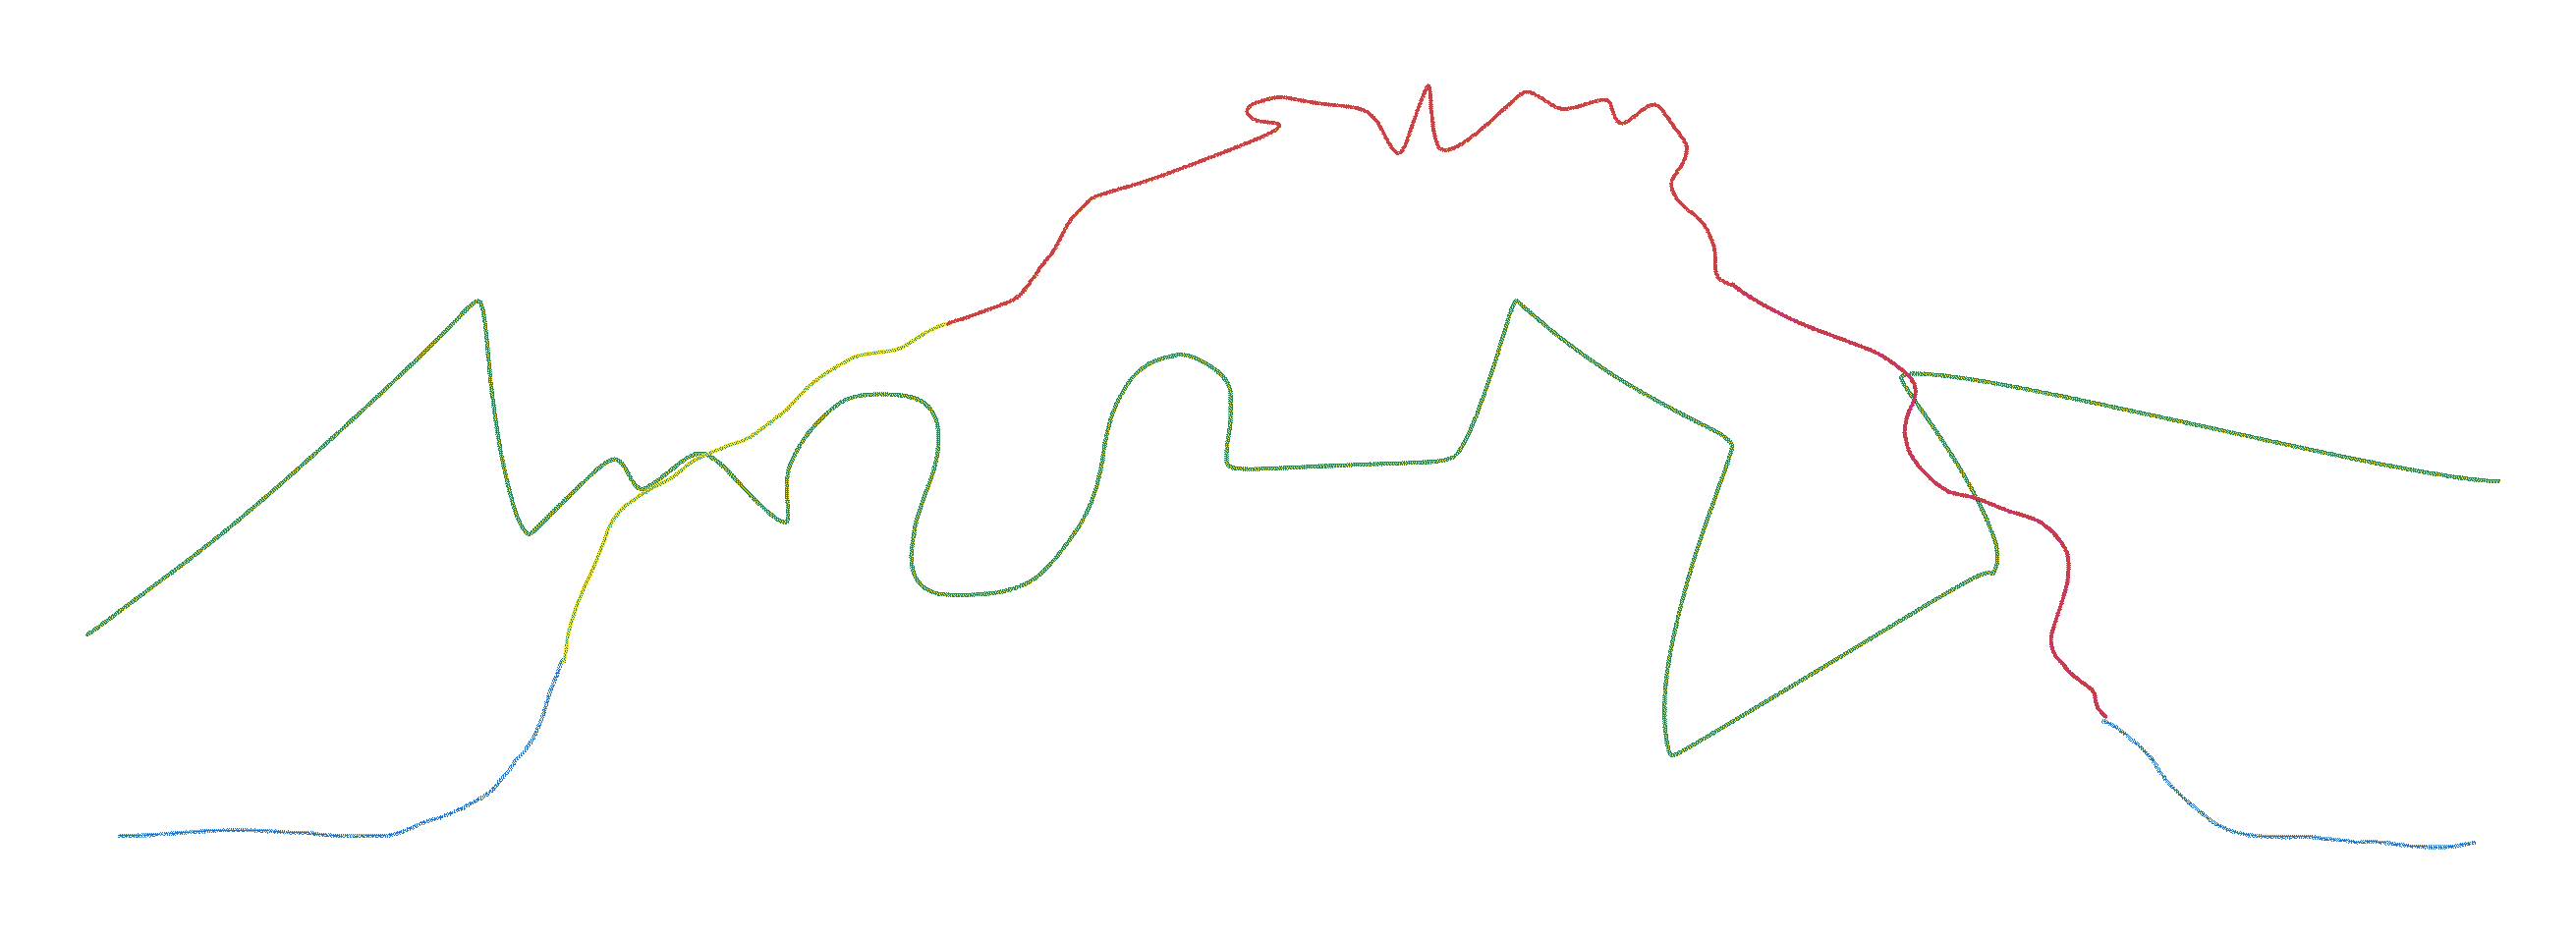 A four-color line representing the fours seasons from left to right overlapping with a green zig-zagging line representing nature's random continuity.